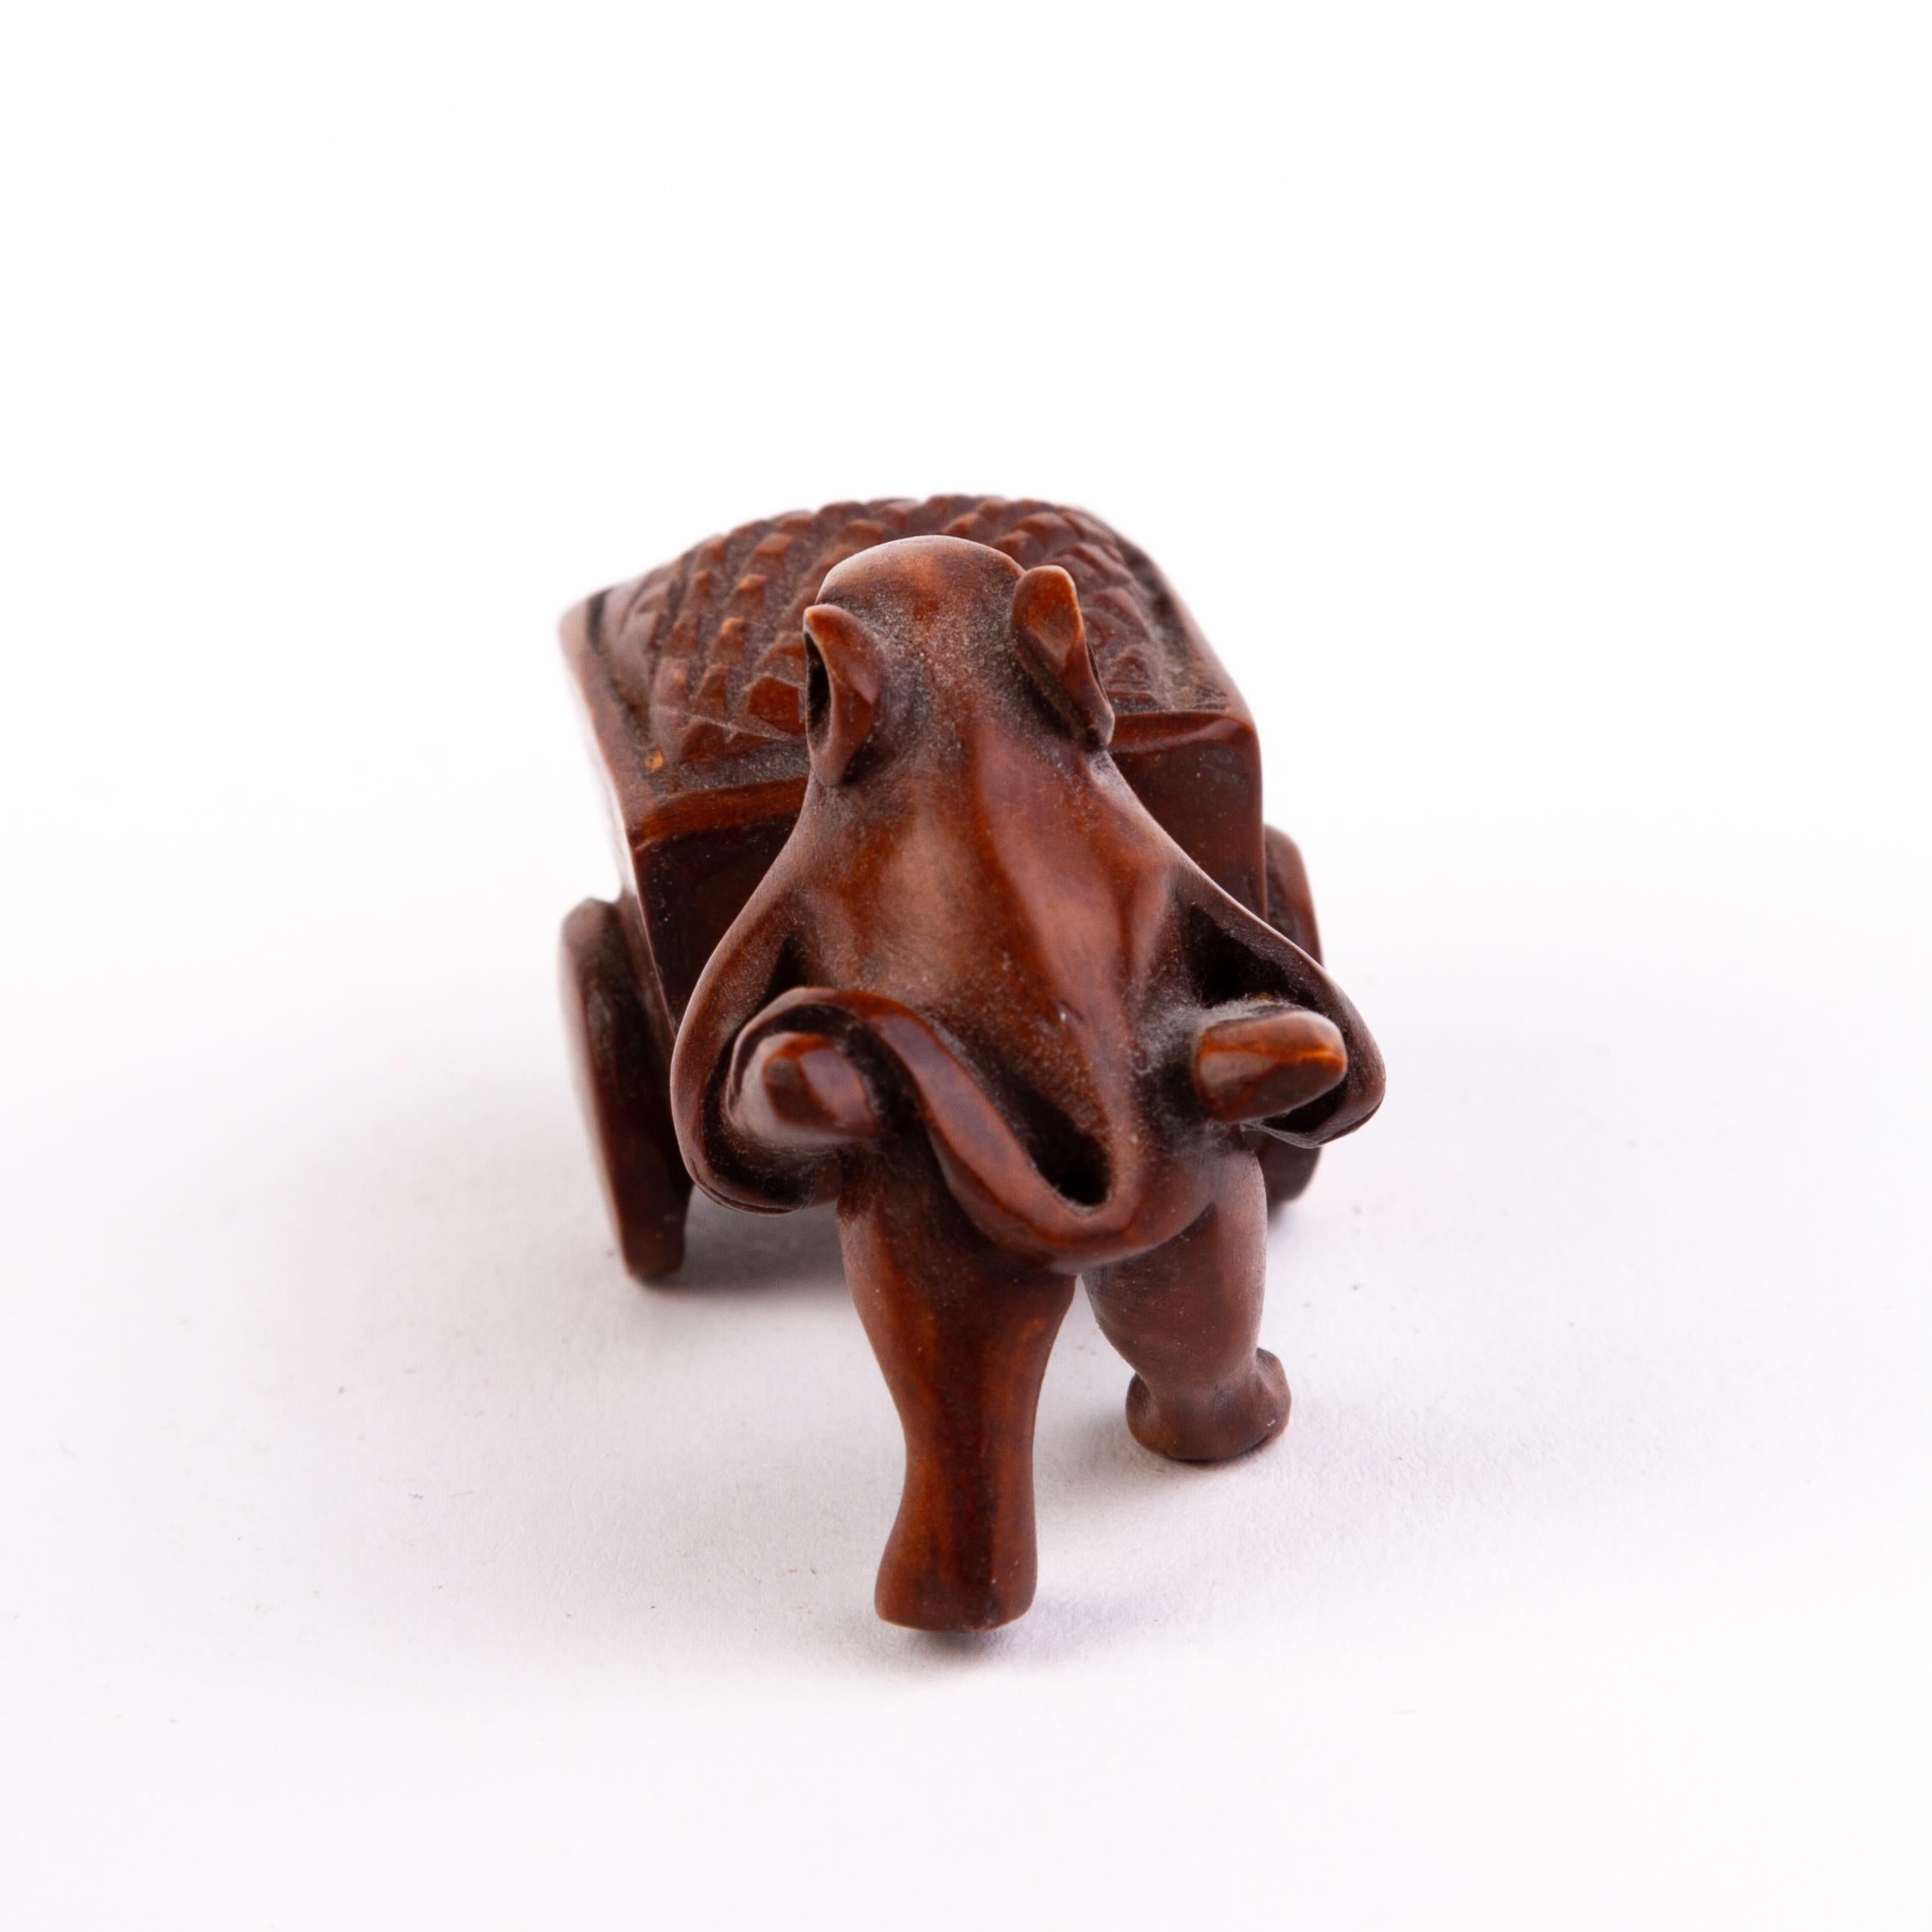 In good condition
From a private collection
Free international shipping
Japanese Boxwood Netsuke Inro of Mouse with Wheelbarrow 